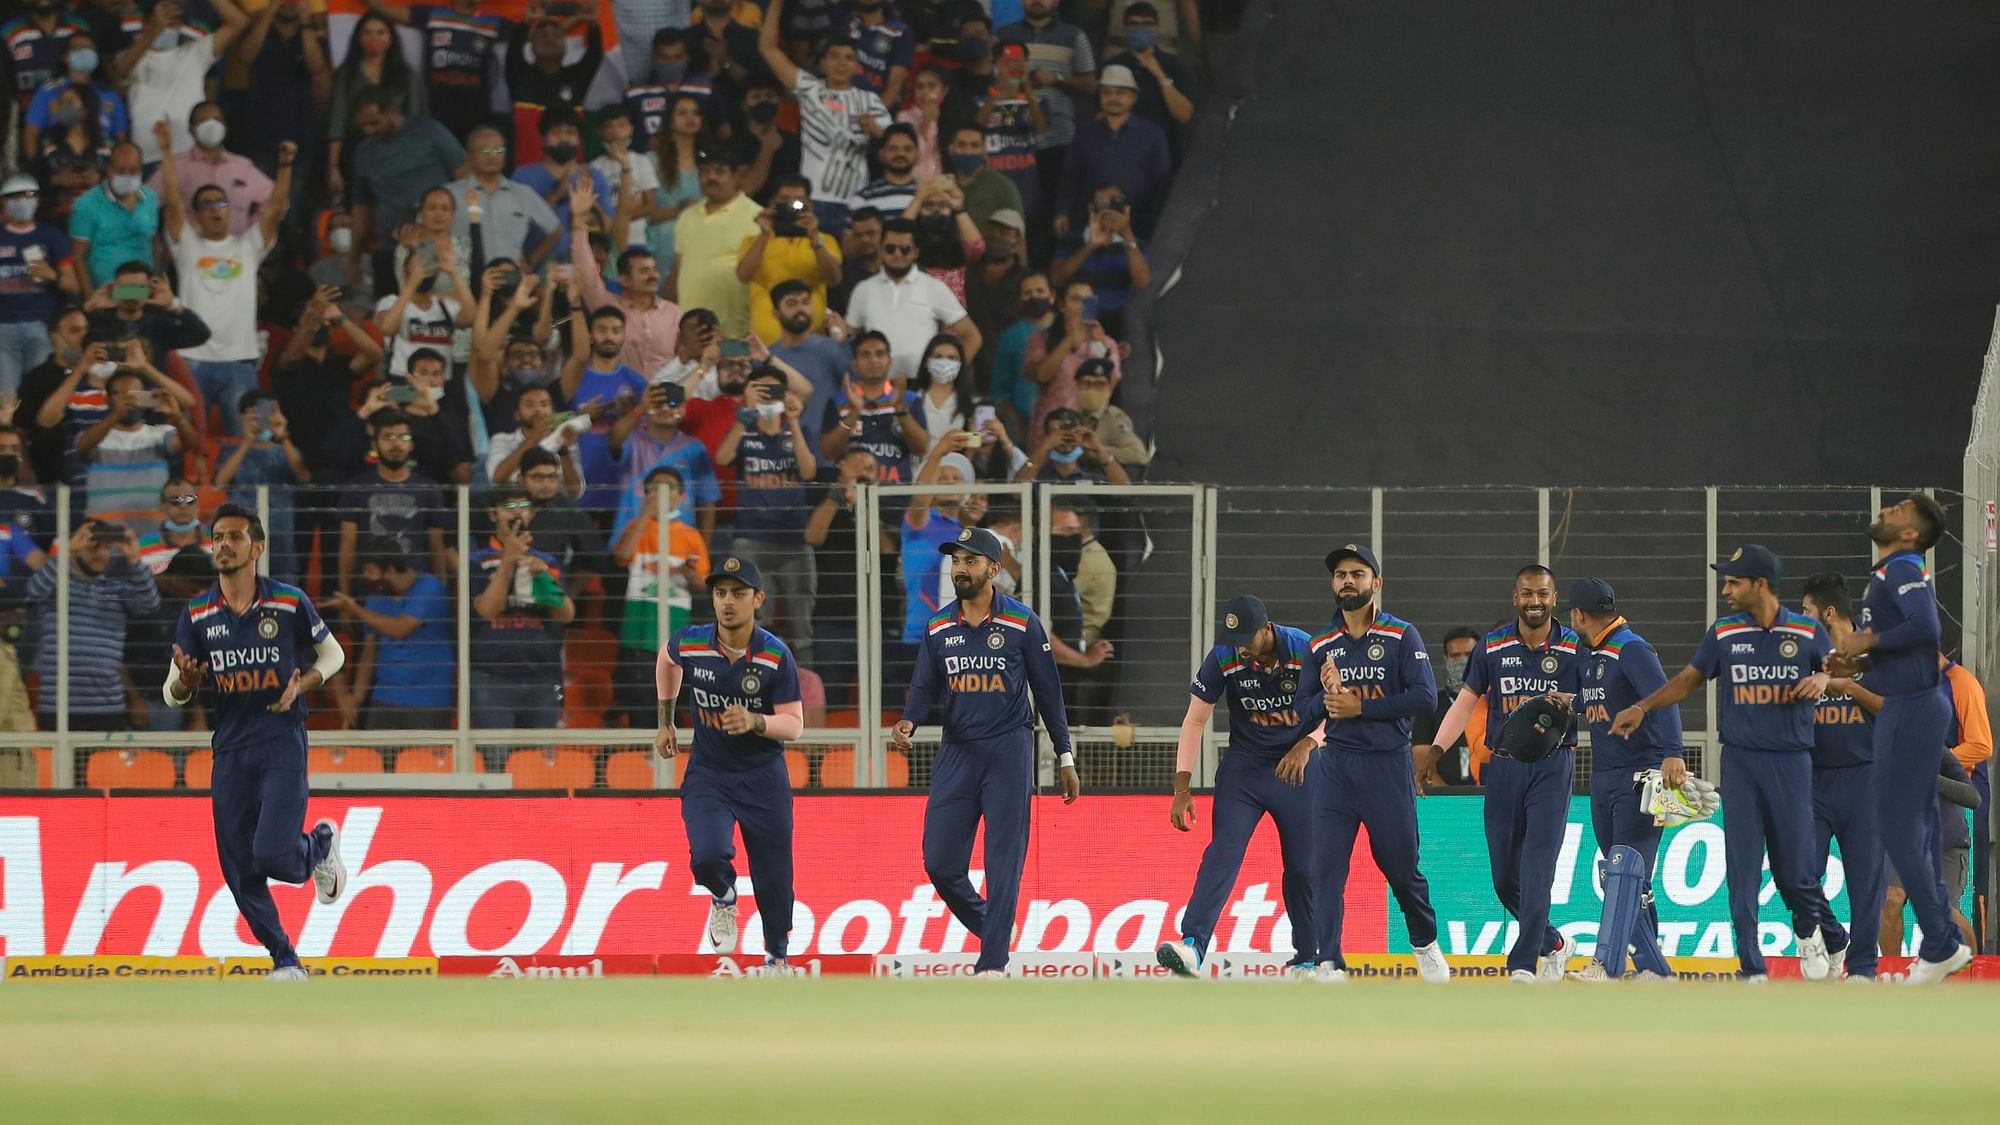 India walk out to field in the 2nd T20I vs England&nbsp;